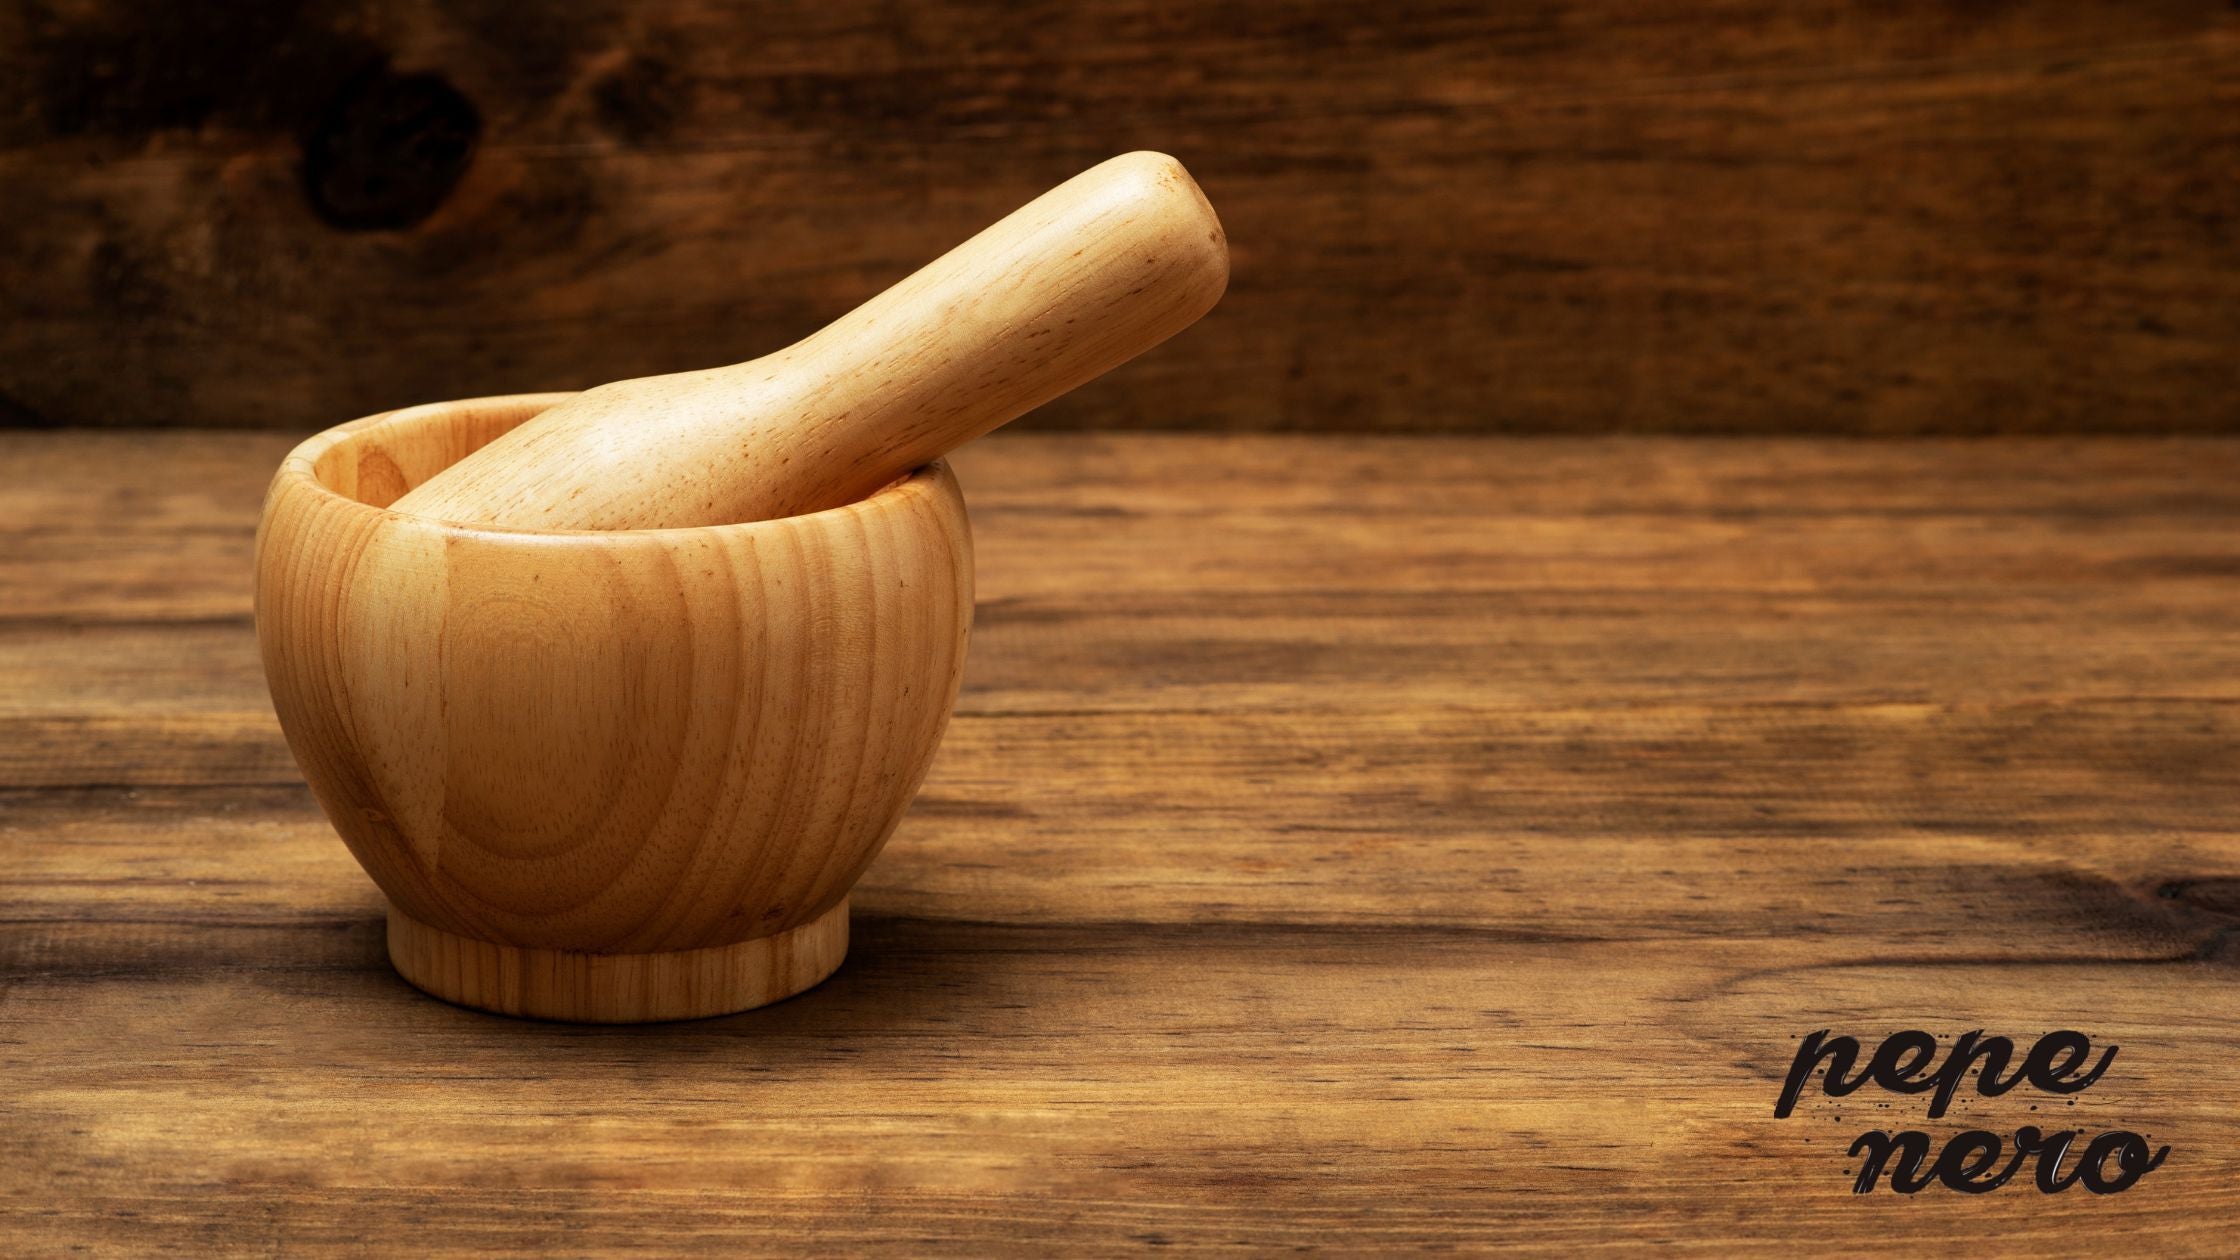 A Guide to Choosing a Mortar and Pestle